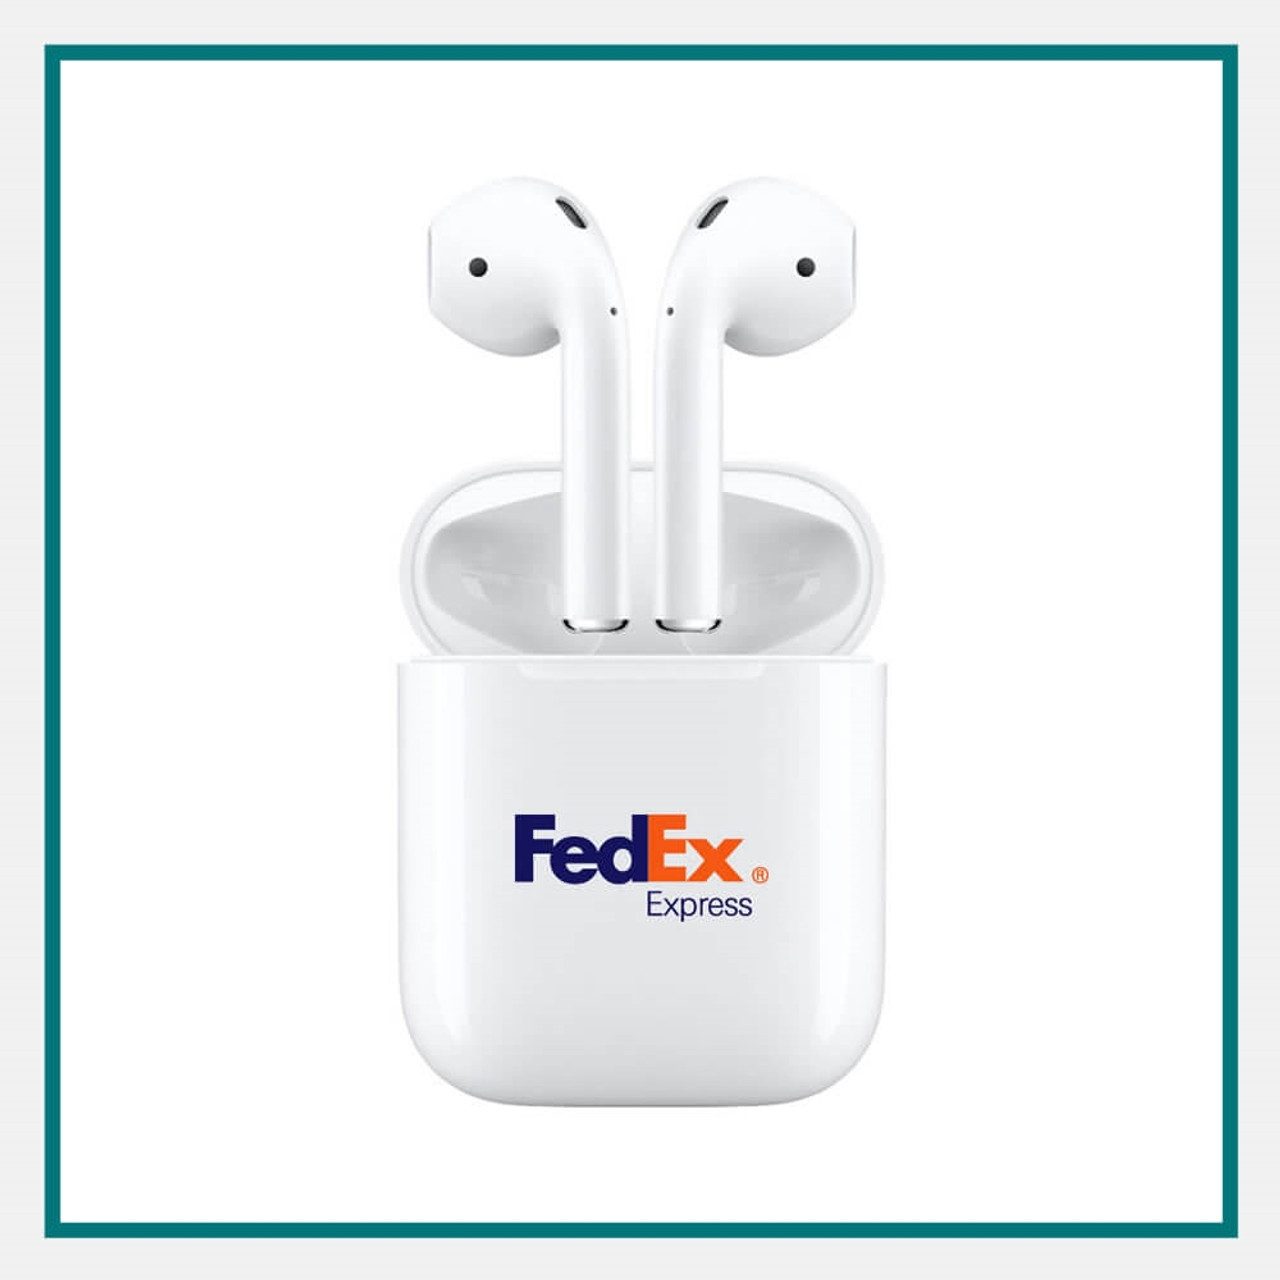 Buy AirPods (2nd generation) with Charging Case - Apple